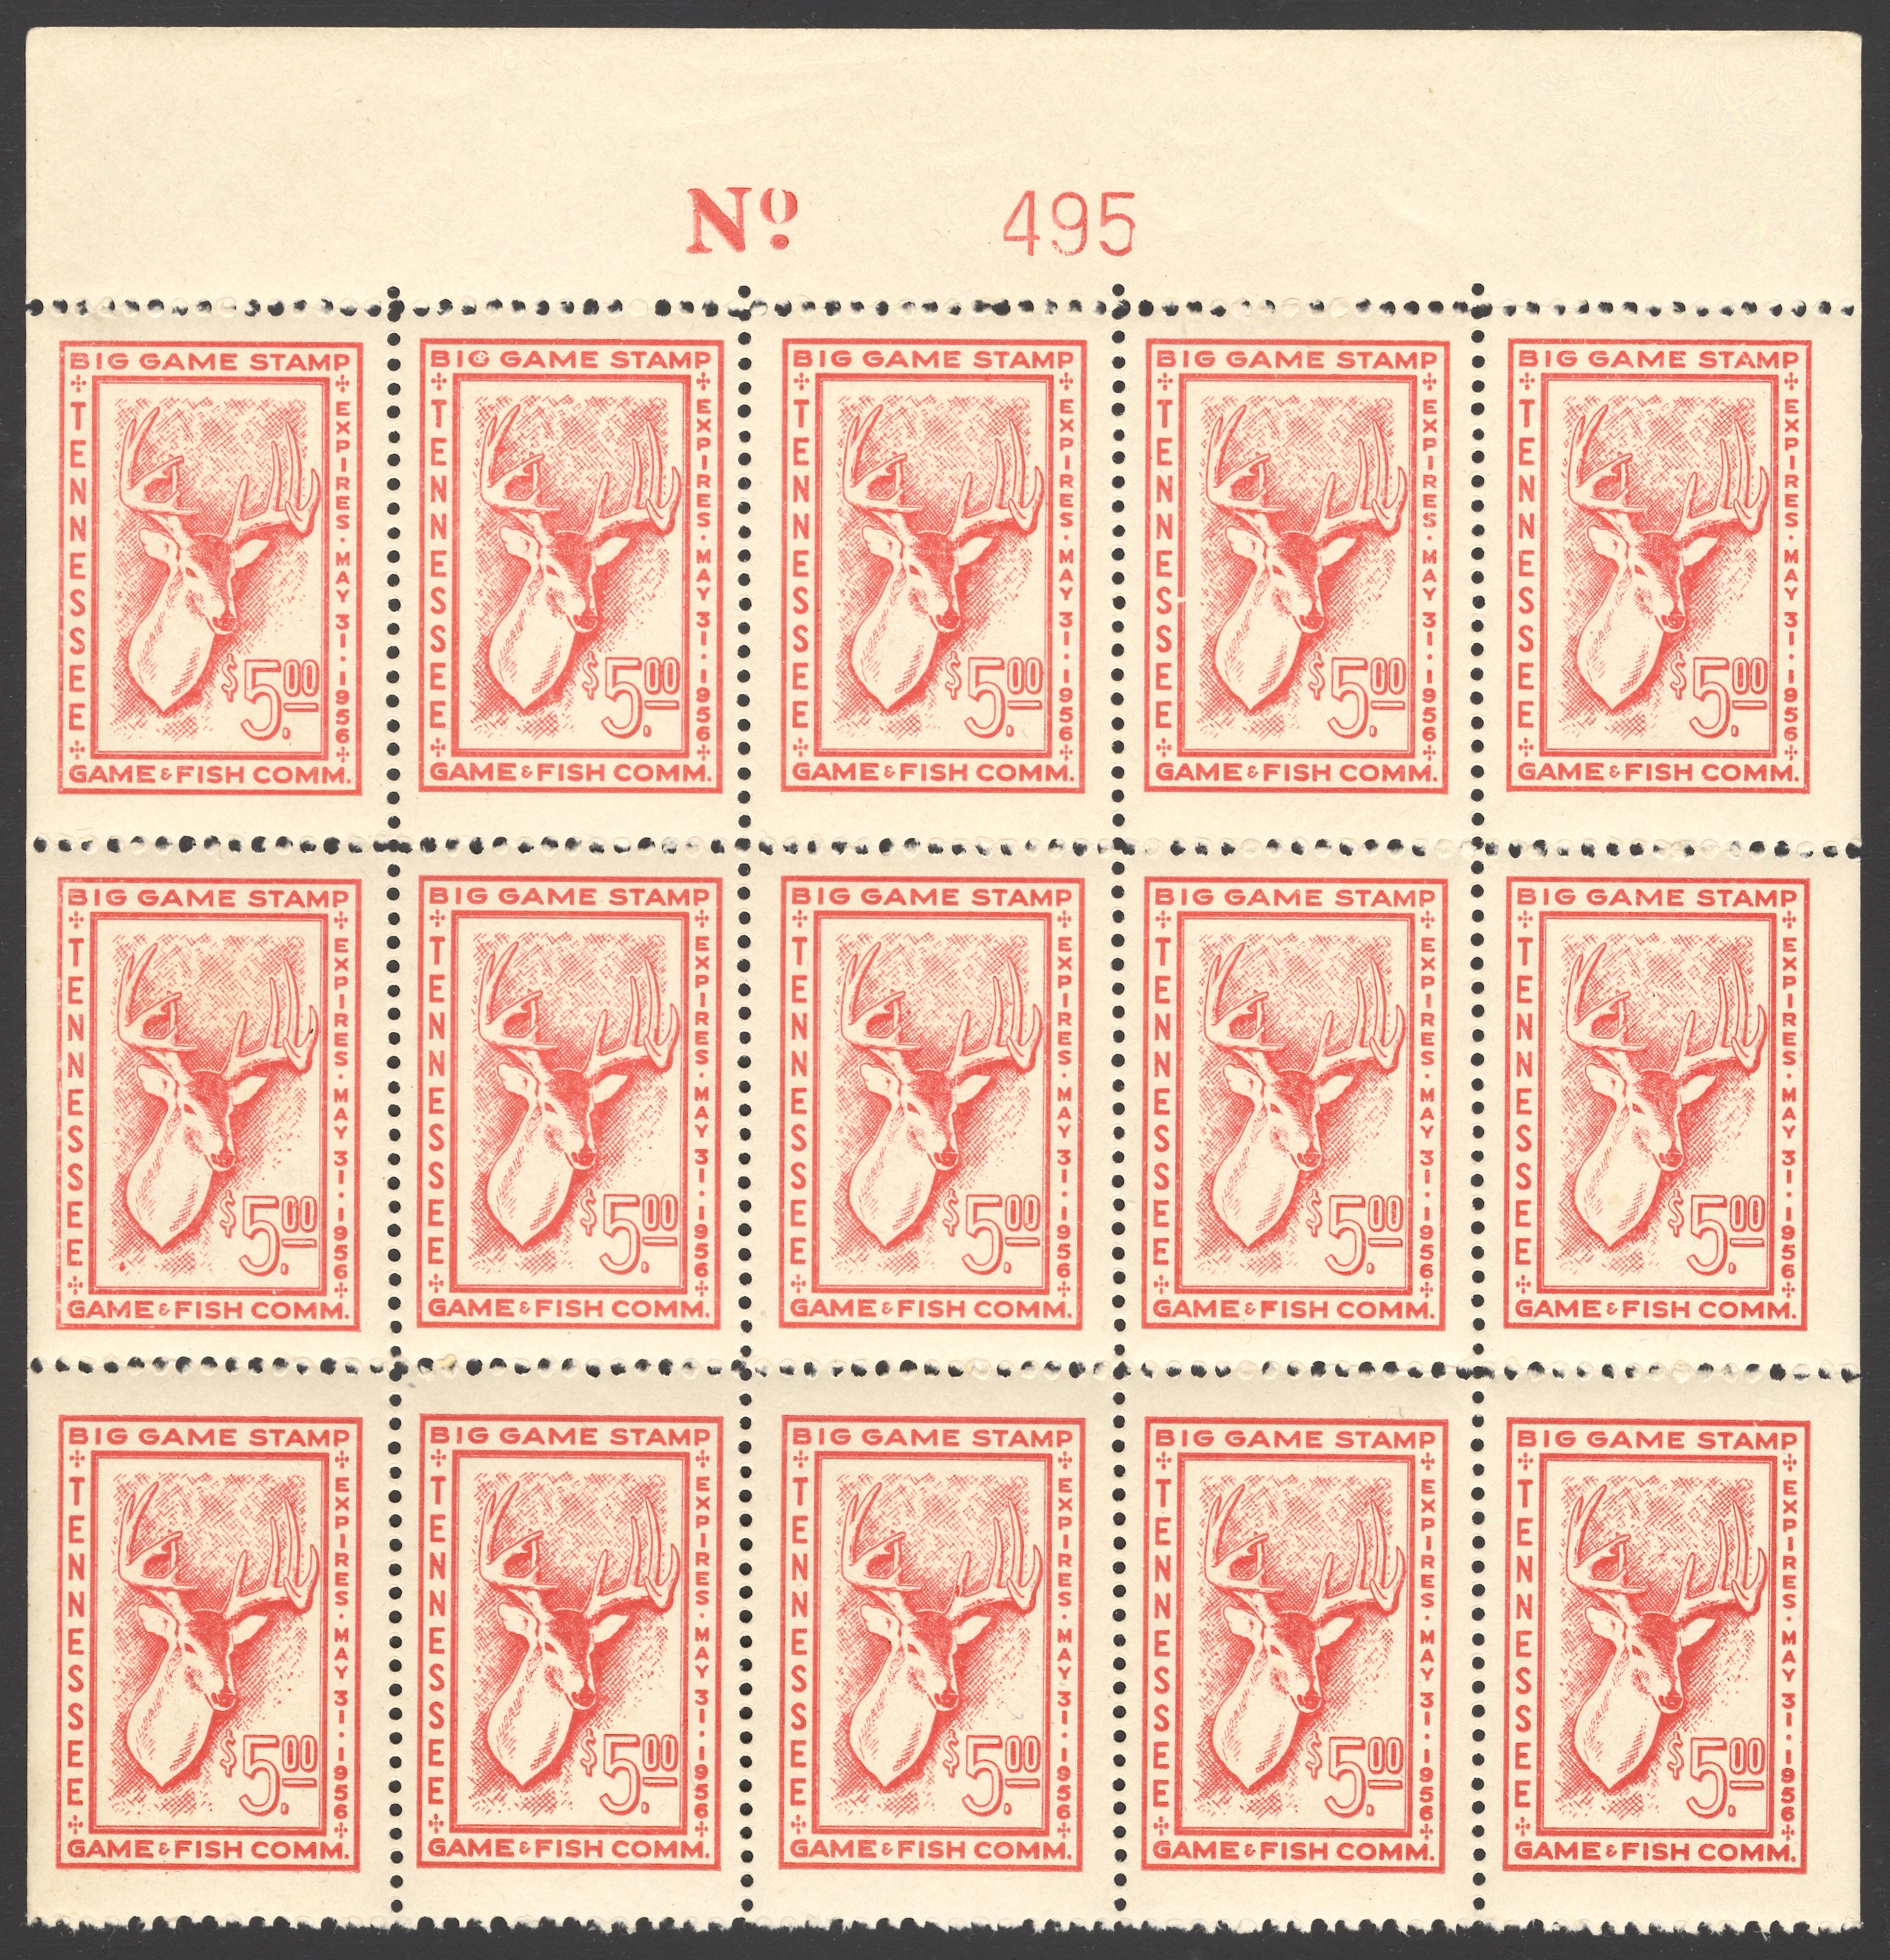 1955-56 Tennessee Big Game Upper Block of 15 with Plate Number, ex Carnahan Archive